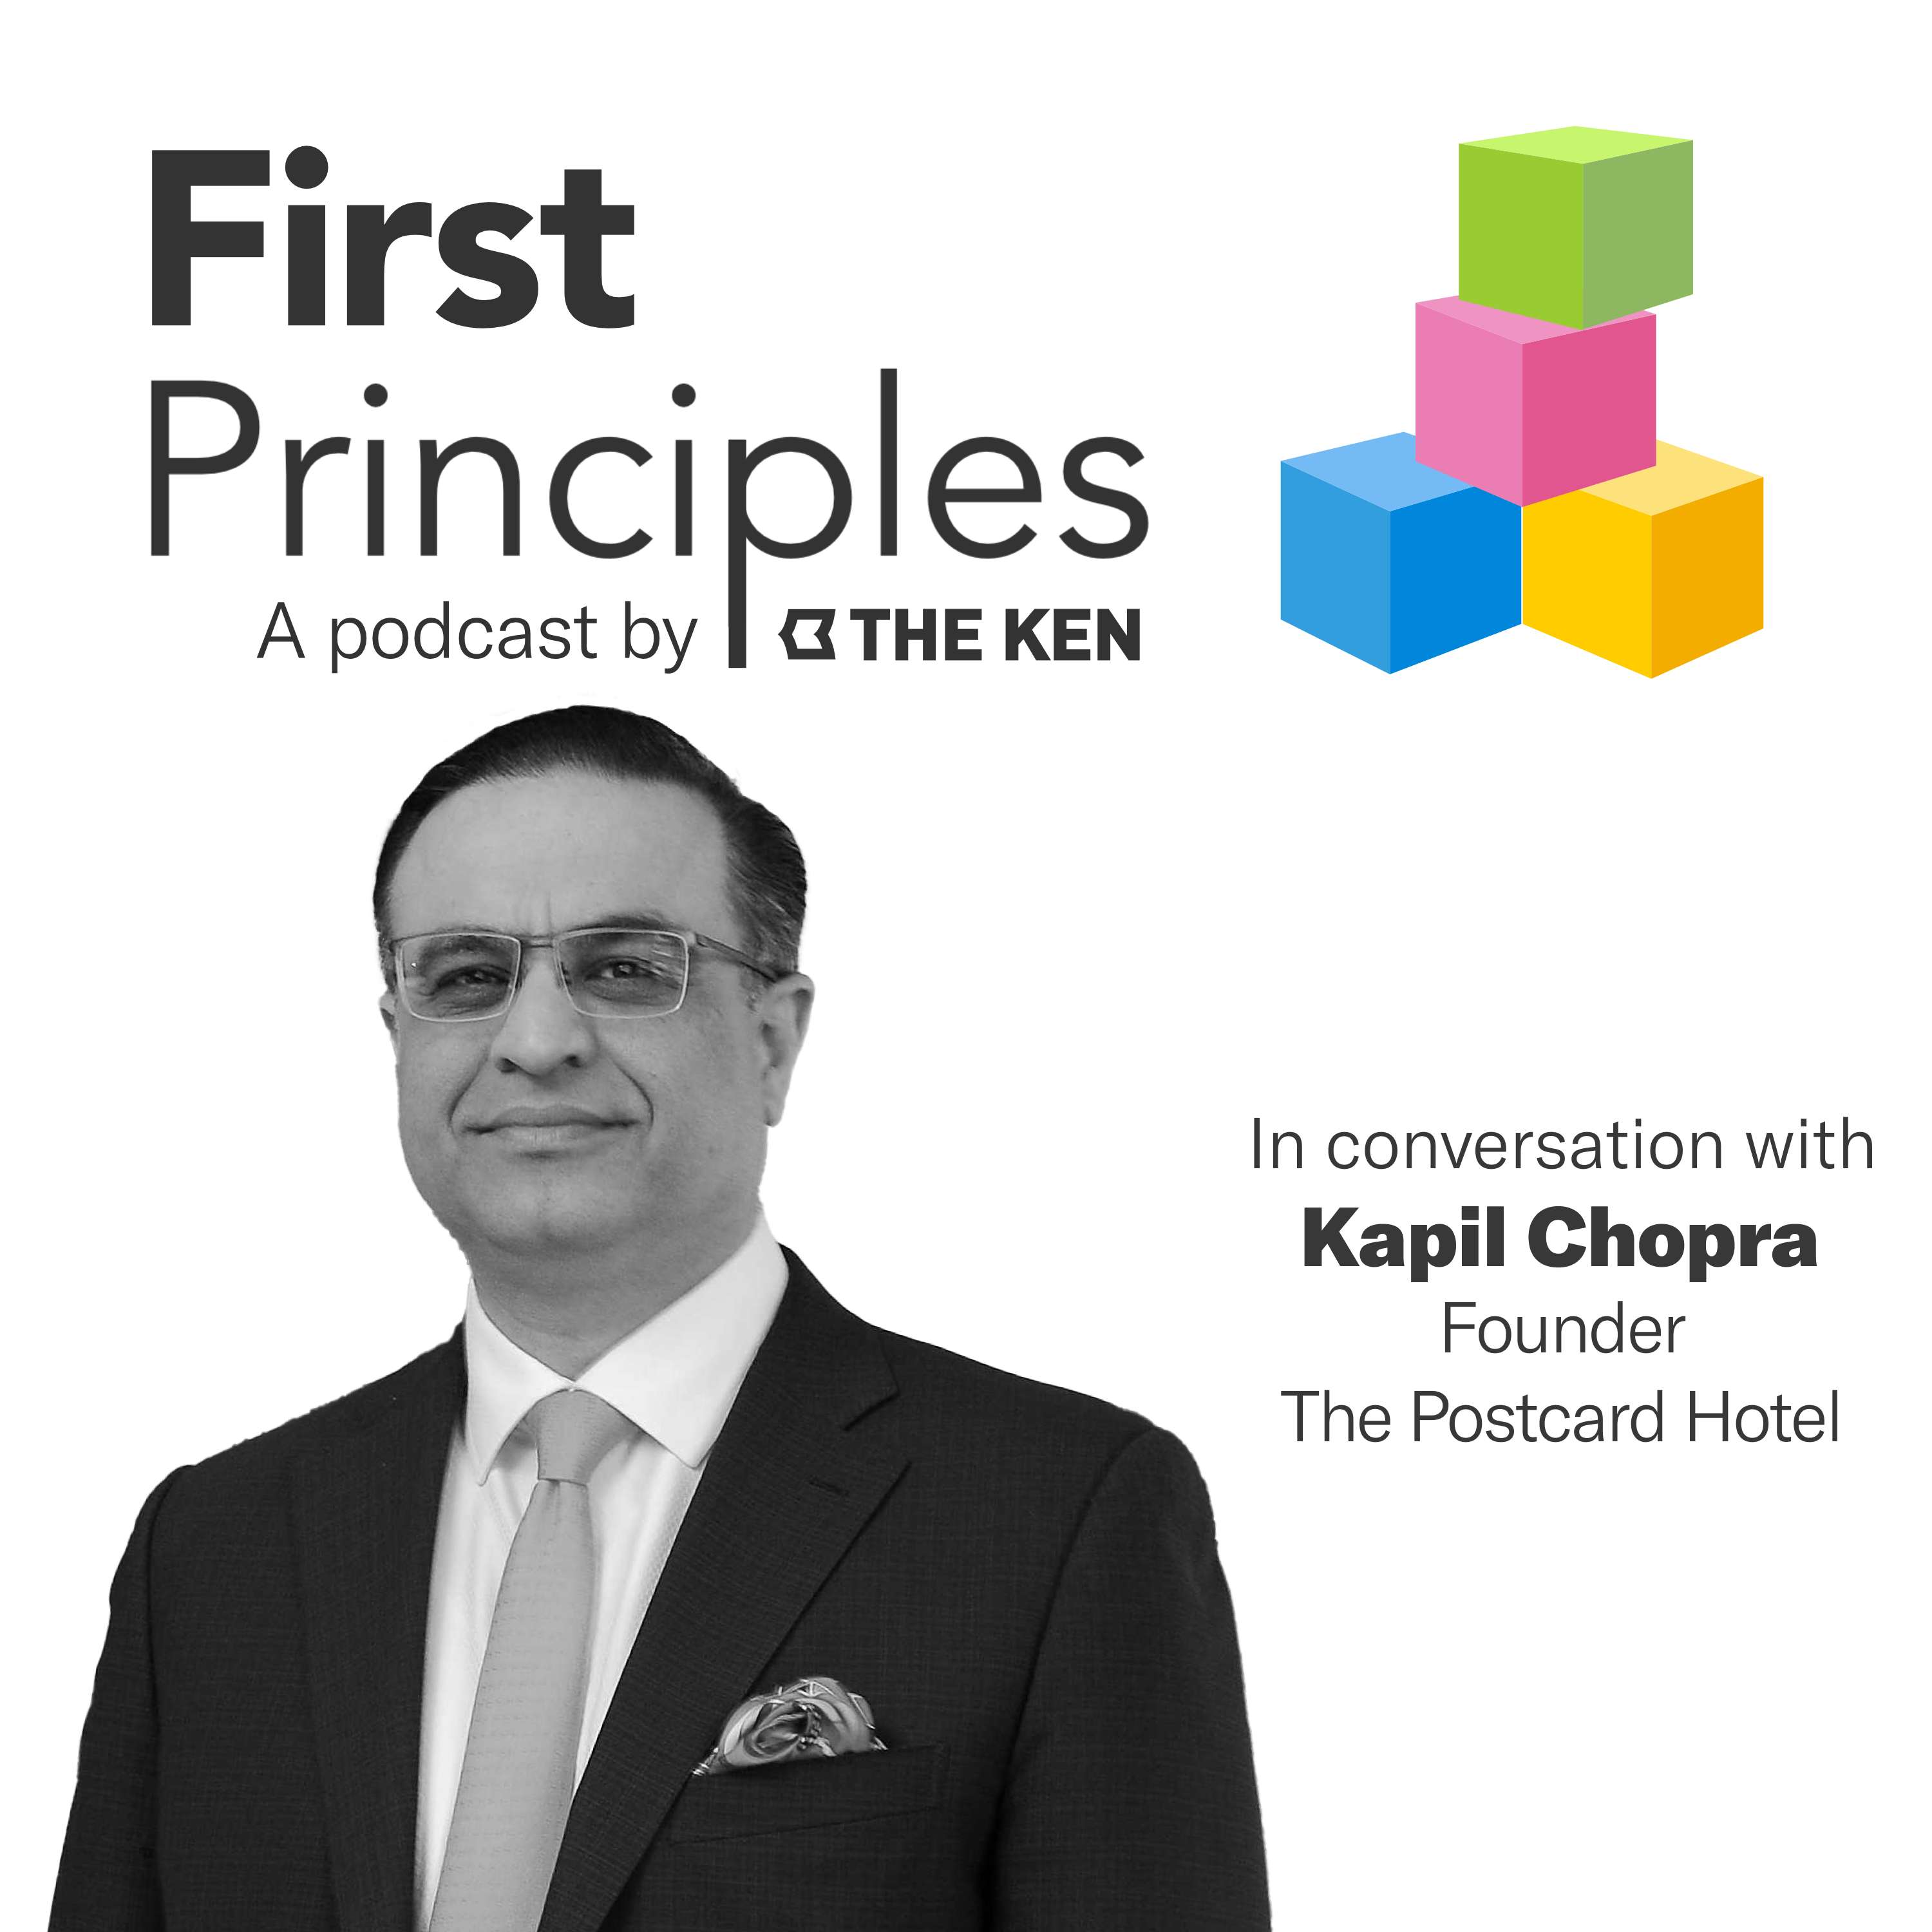 Postcard Hotels' Kapil Chopra wants to build an iconic luxury hotel group in a hurry and from scratch, but without risking it all